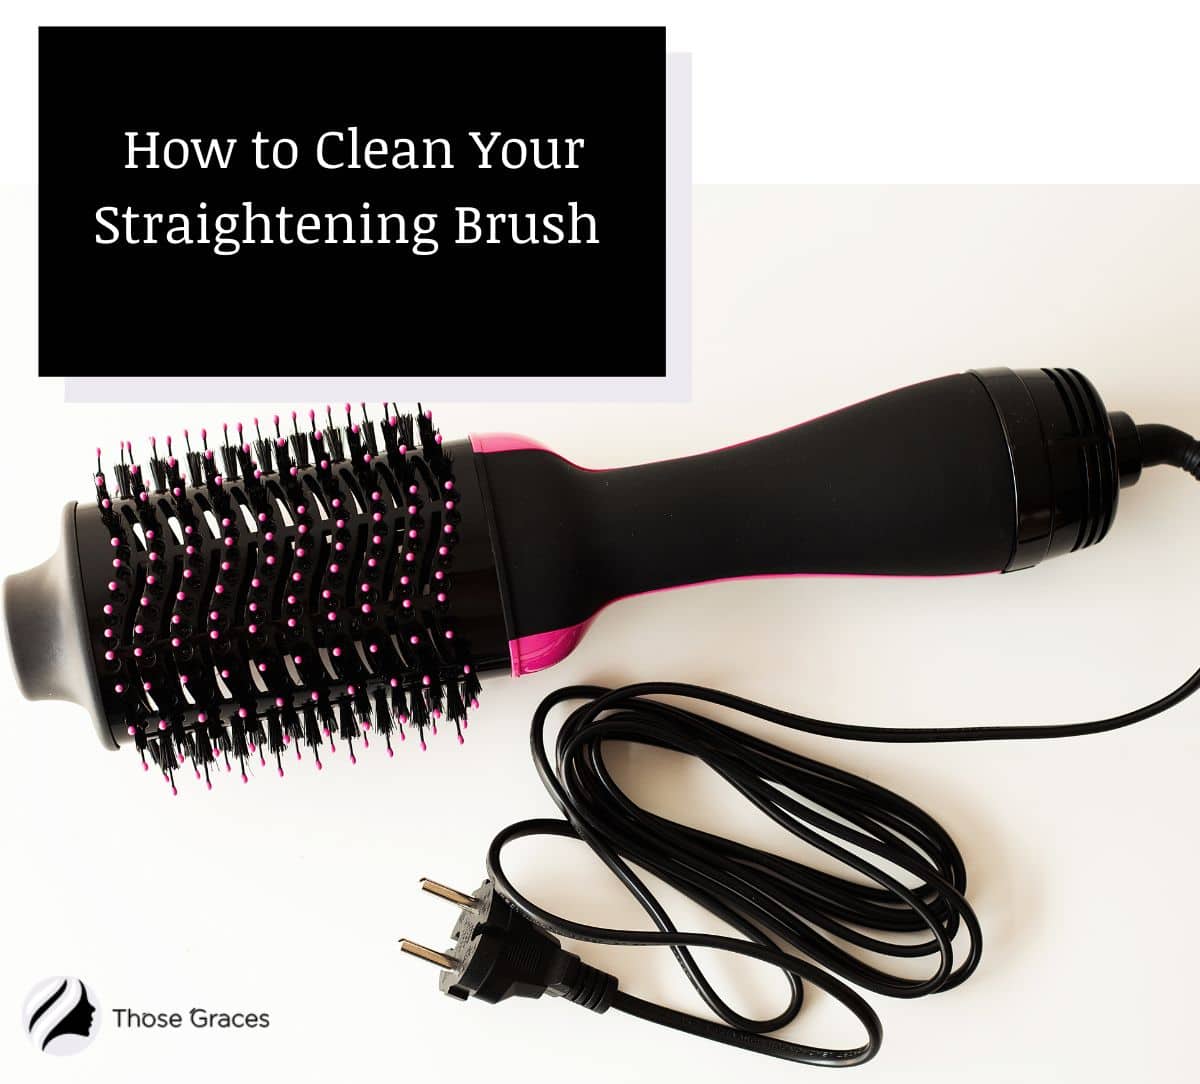 7 Steps for Cleaning Your Hair Straightening Brush